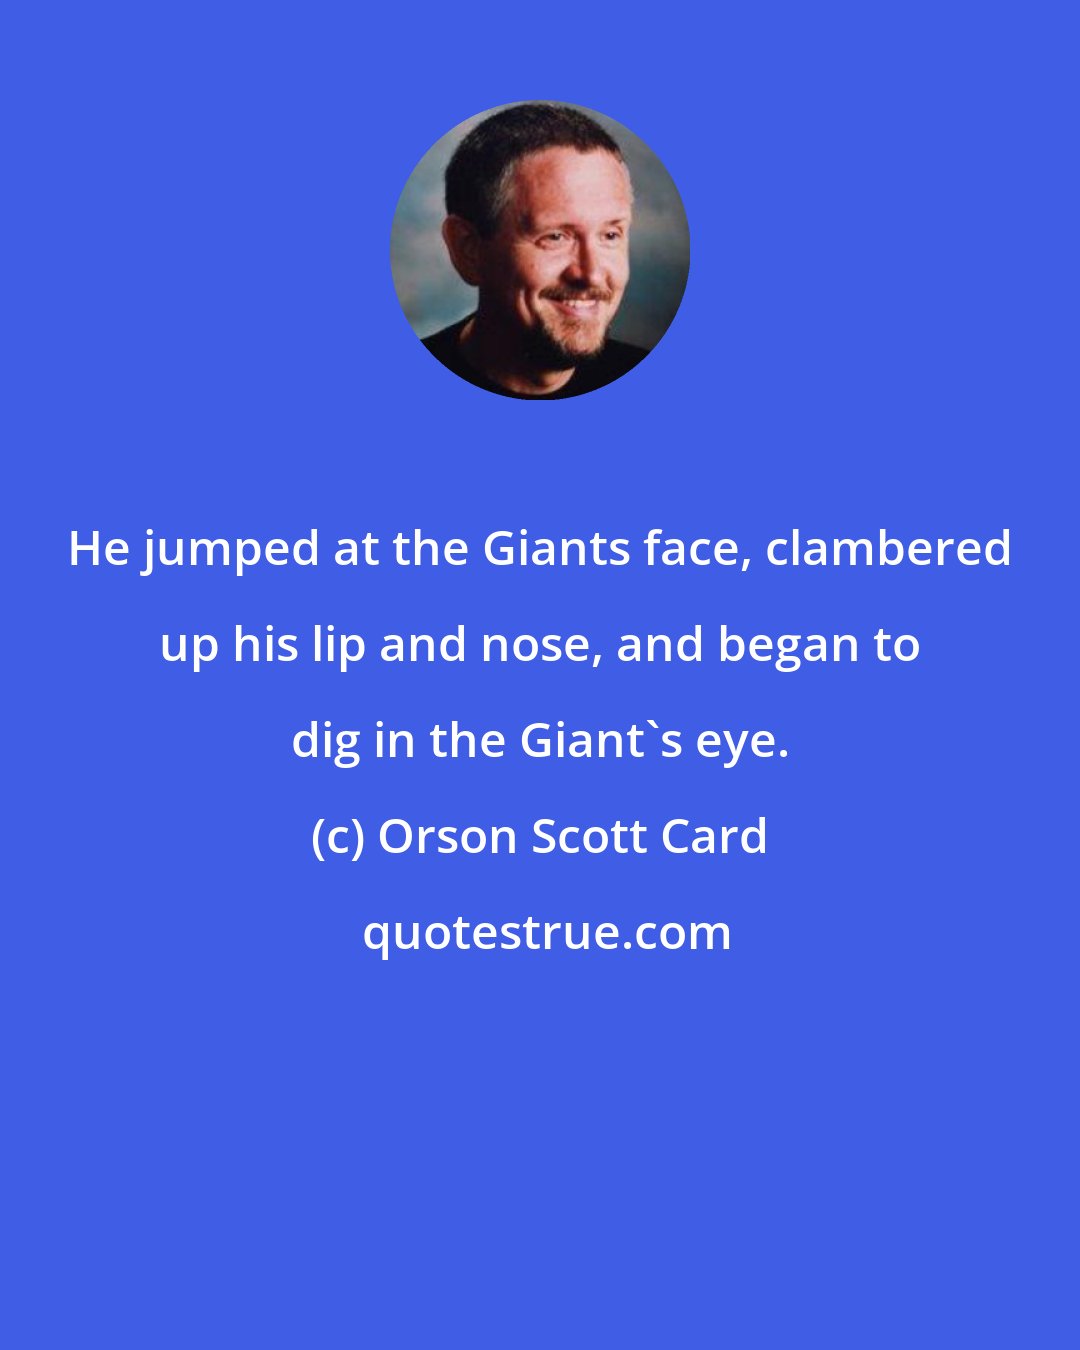 Orson Scott Card: He jumped at the Giants face, clambered up his lip and nose, and began to dig in the Giant's eye.